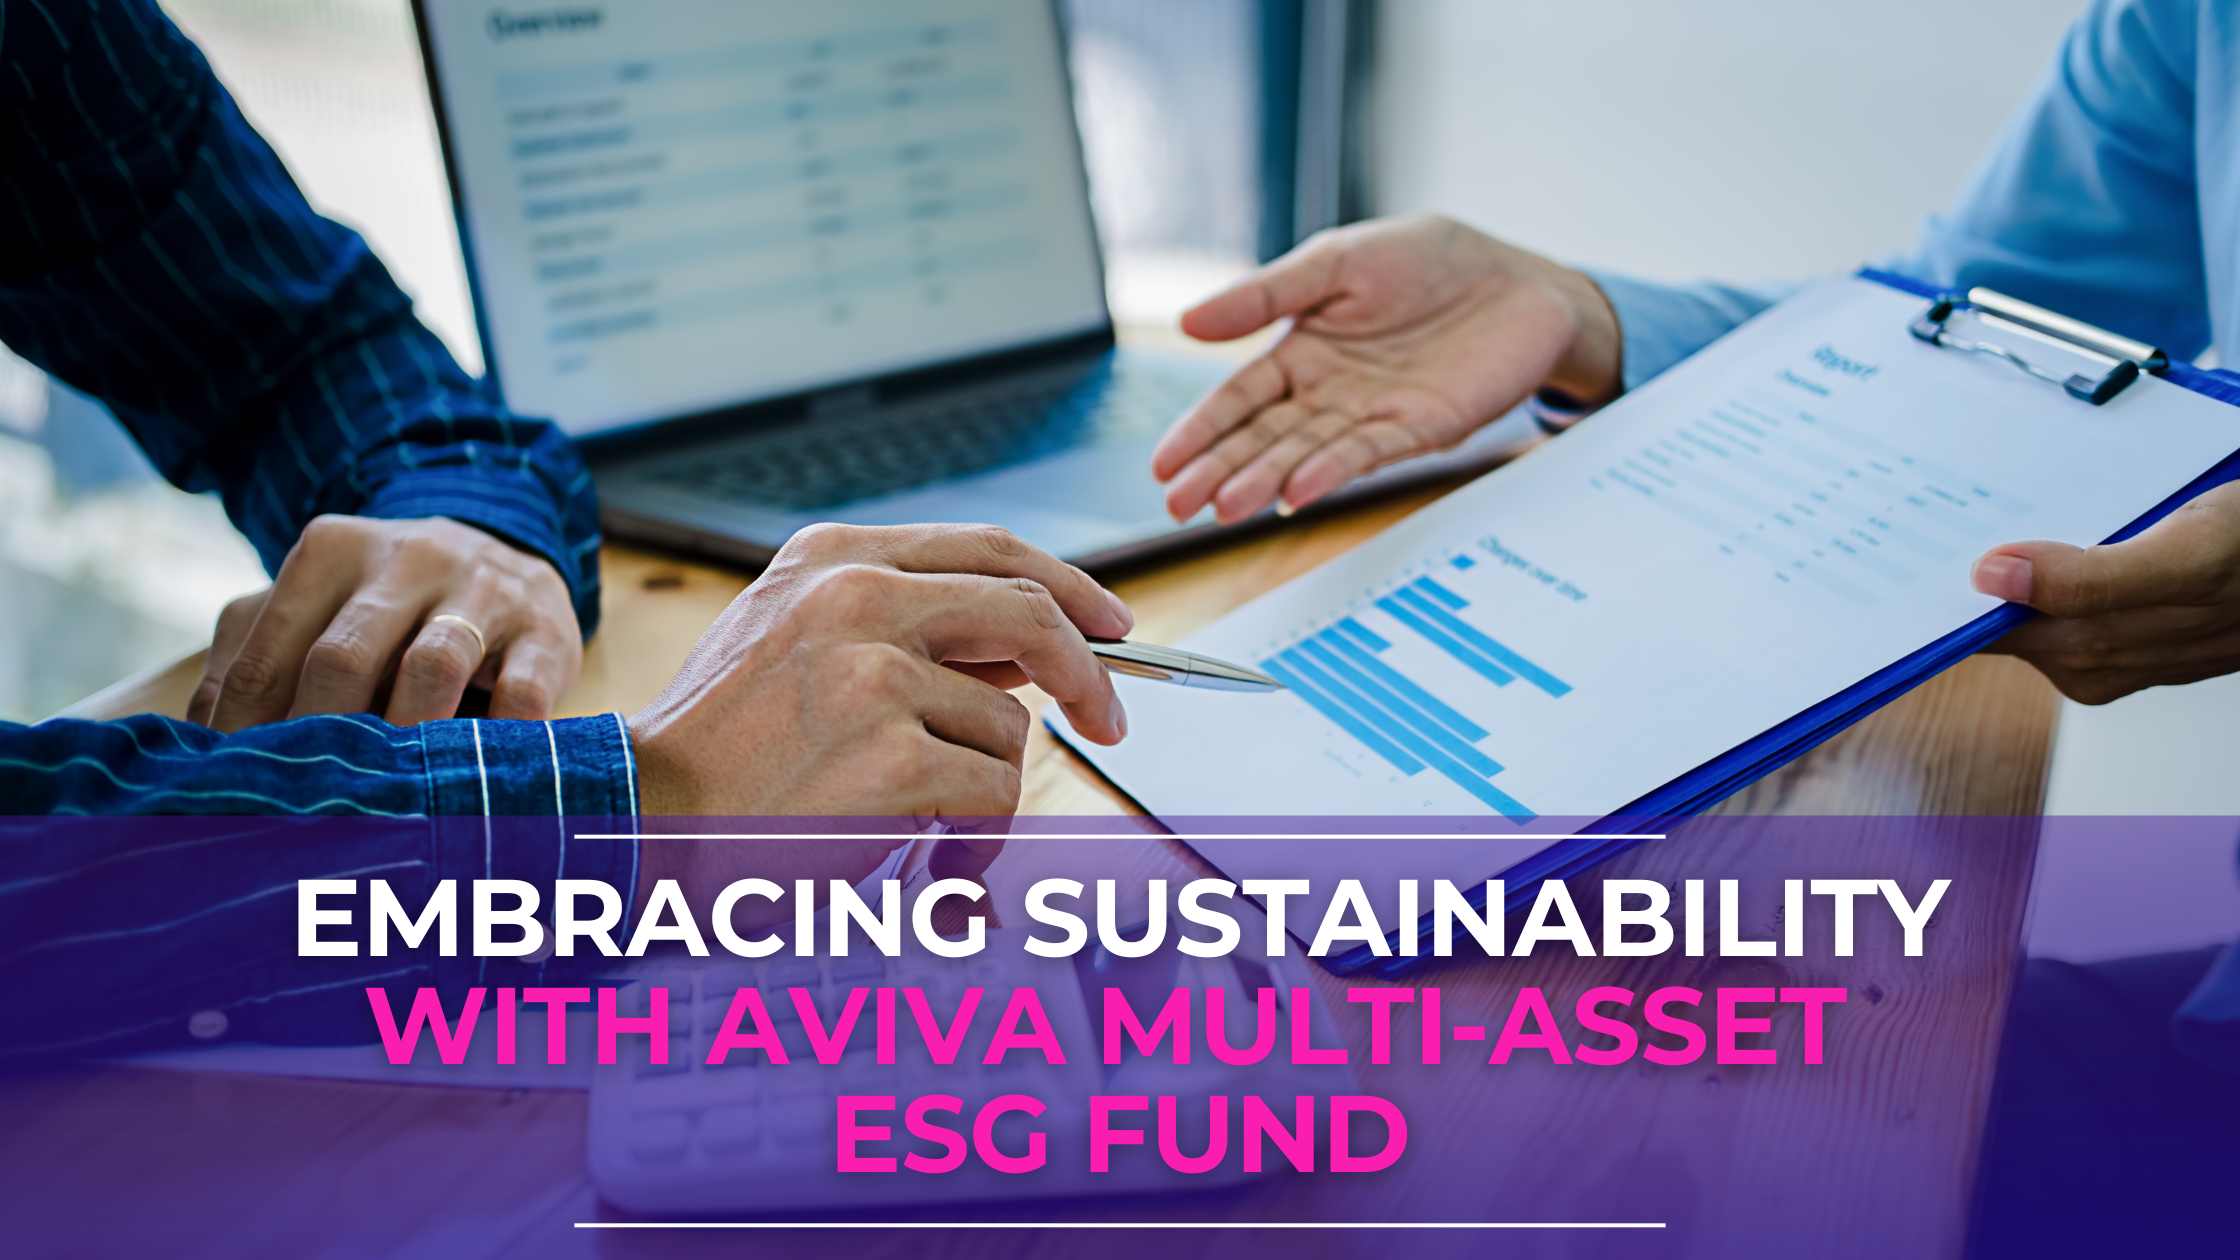 Embracing Sustainability with Aviva Multi-Asset ESG Fund - LowQuotes